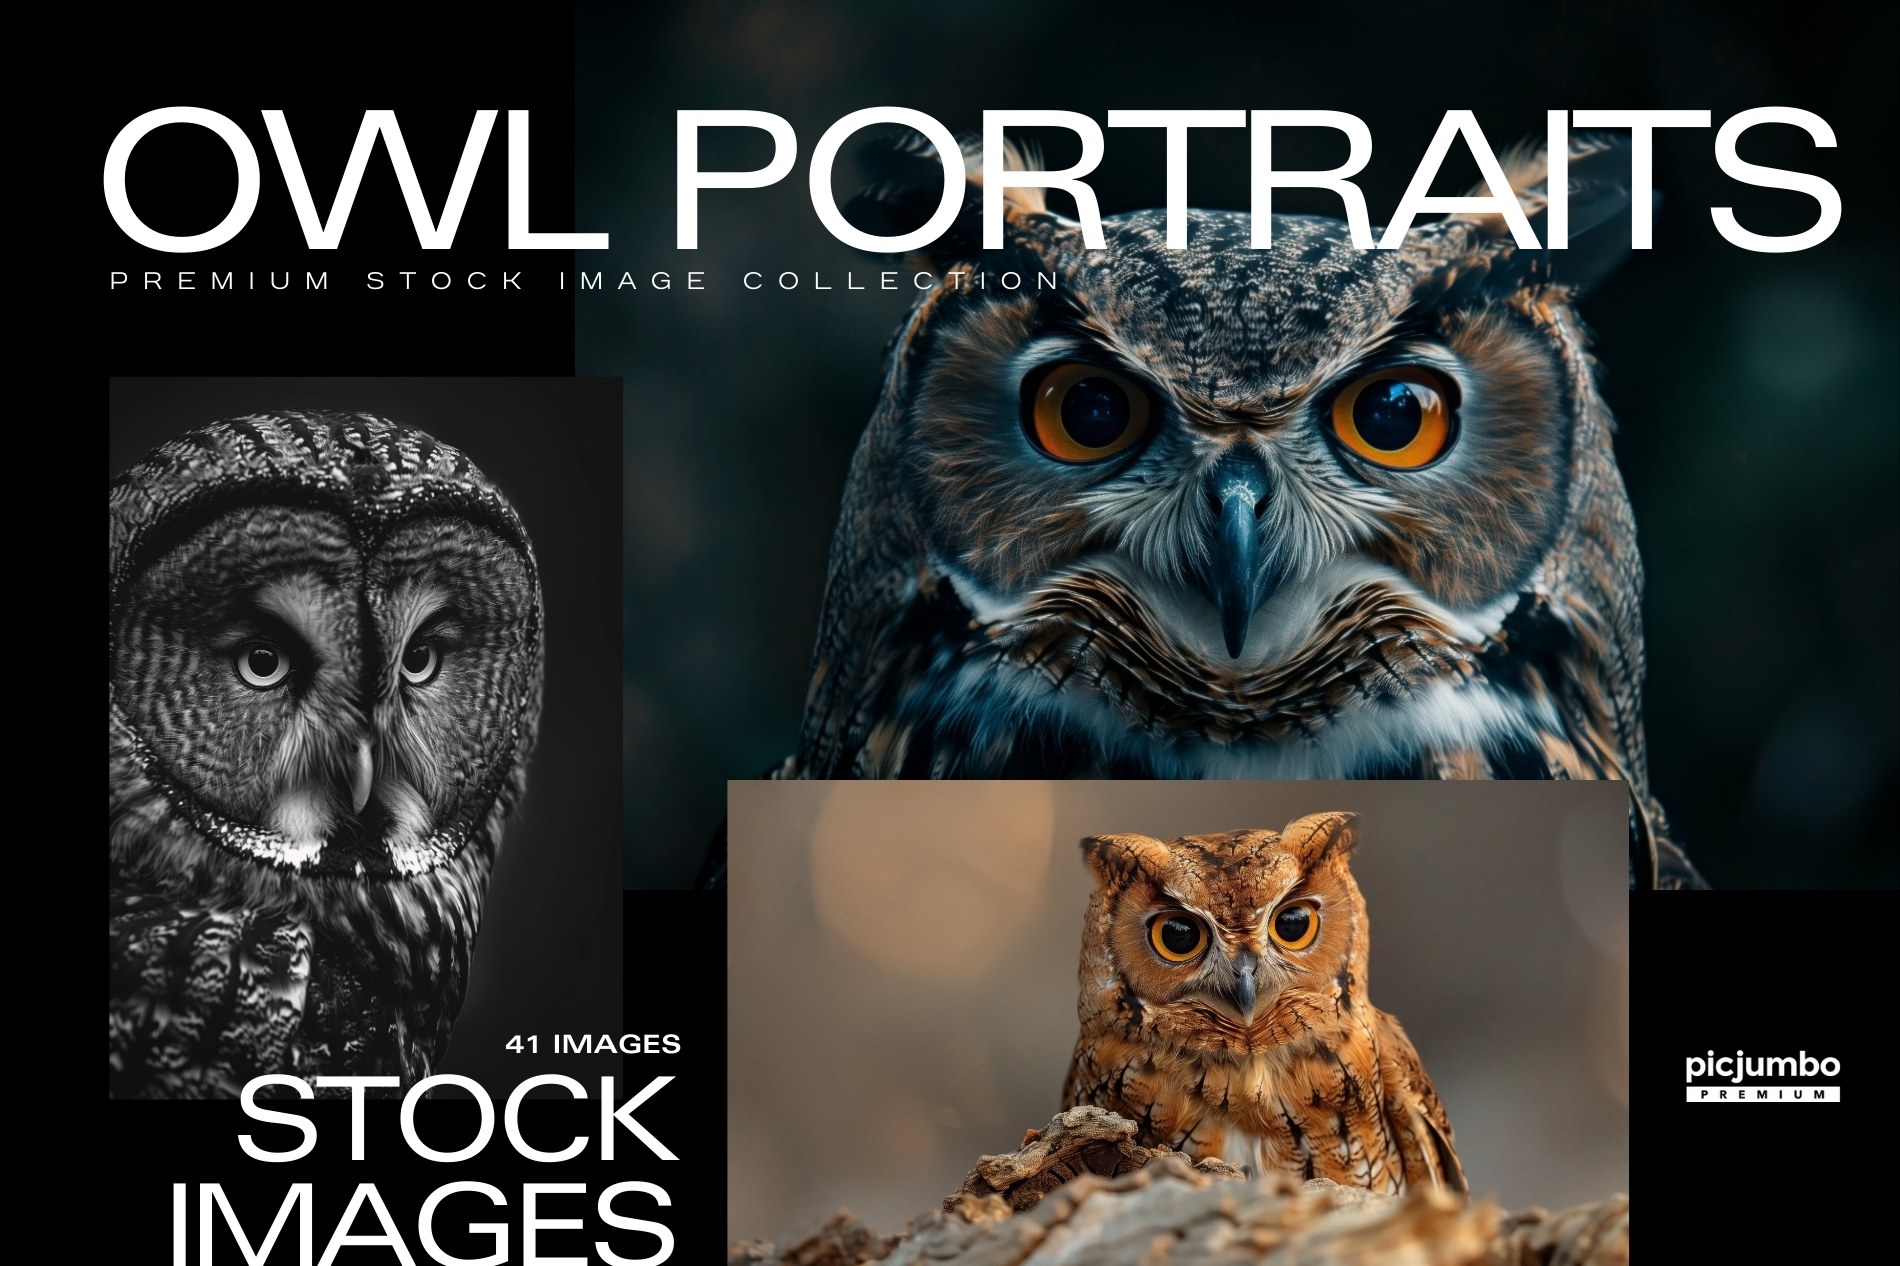 Download hi-res stock photos from our Owl Portraits PREMIUM Collection!